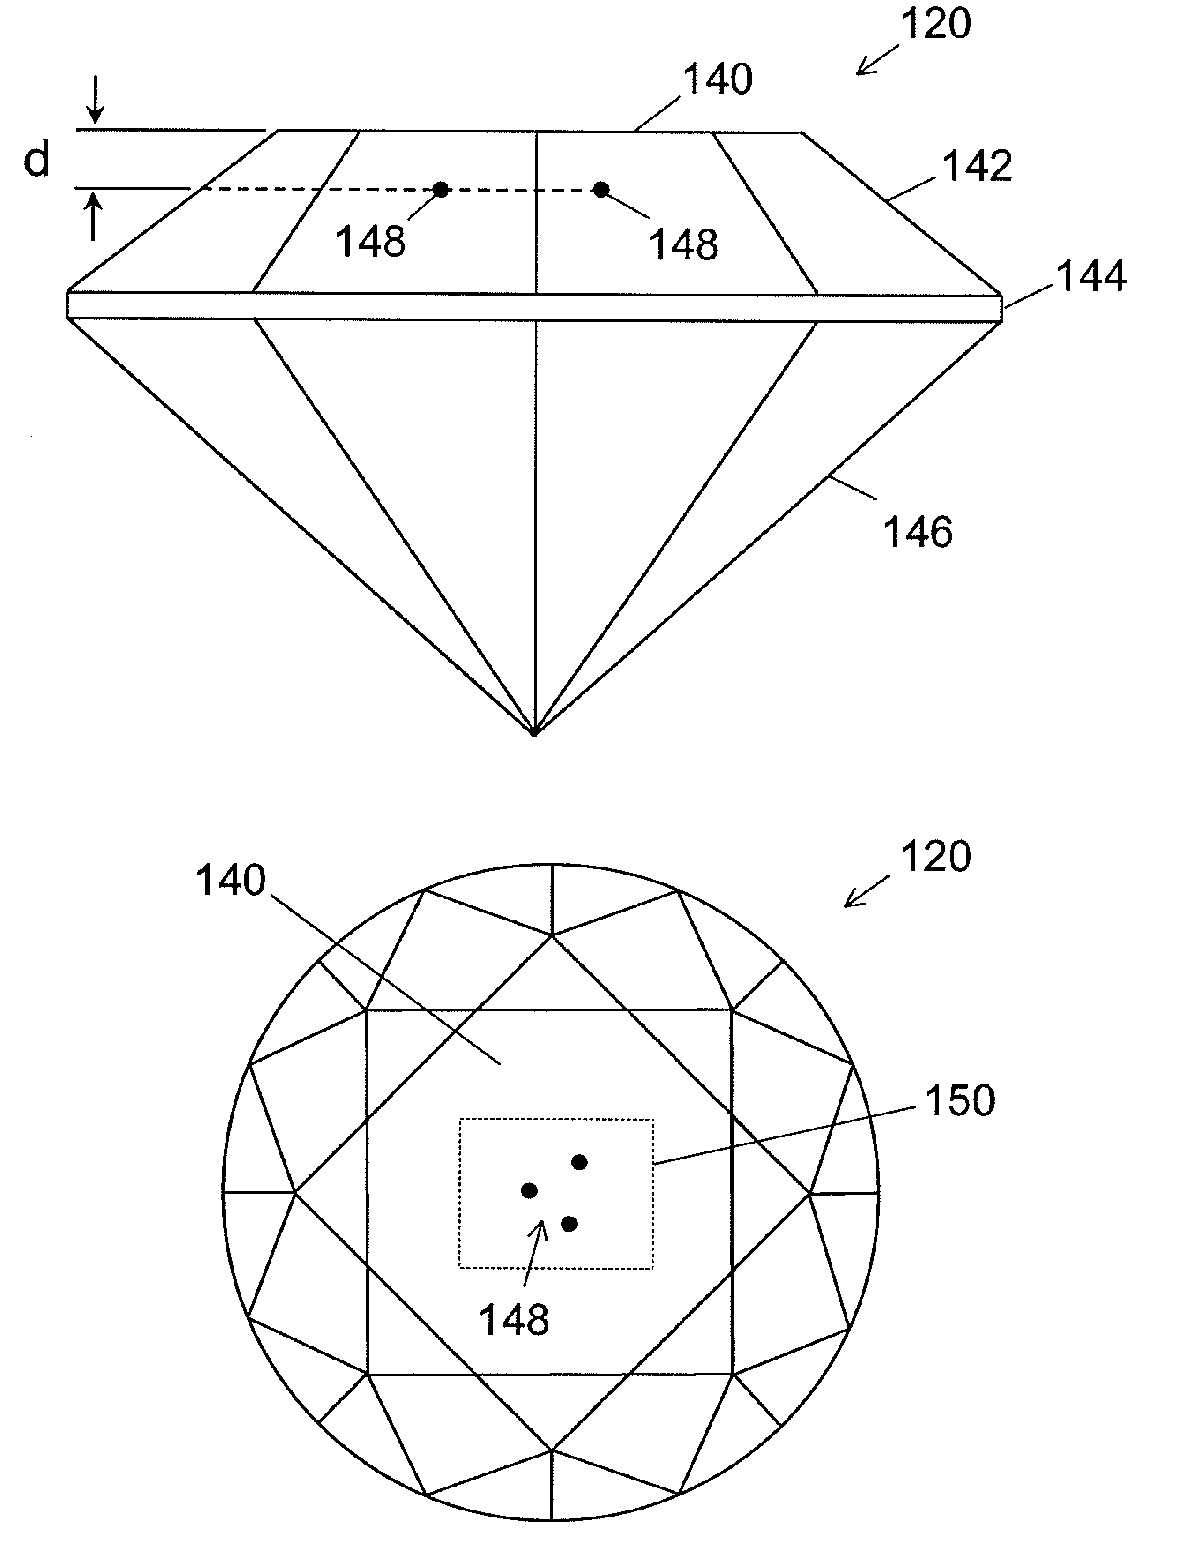 Method and system for laser marking in the volume of gemstones such as diamonds